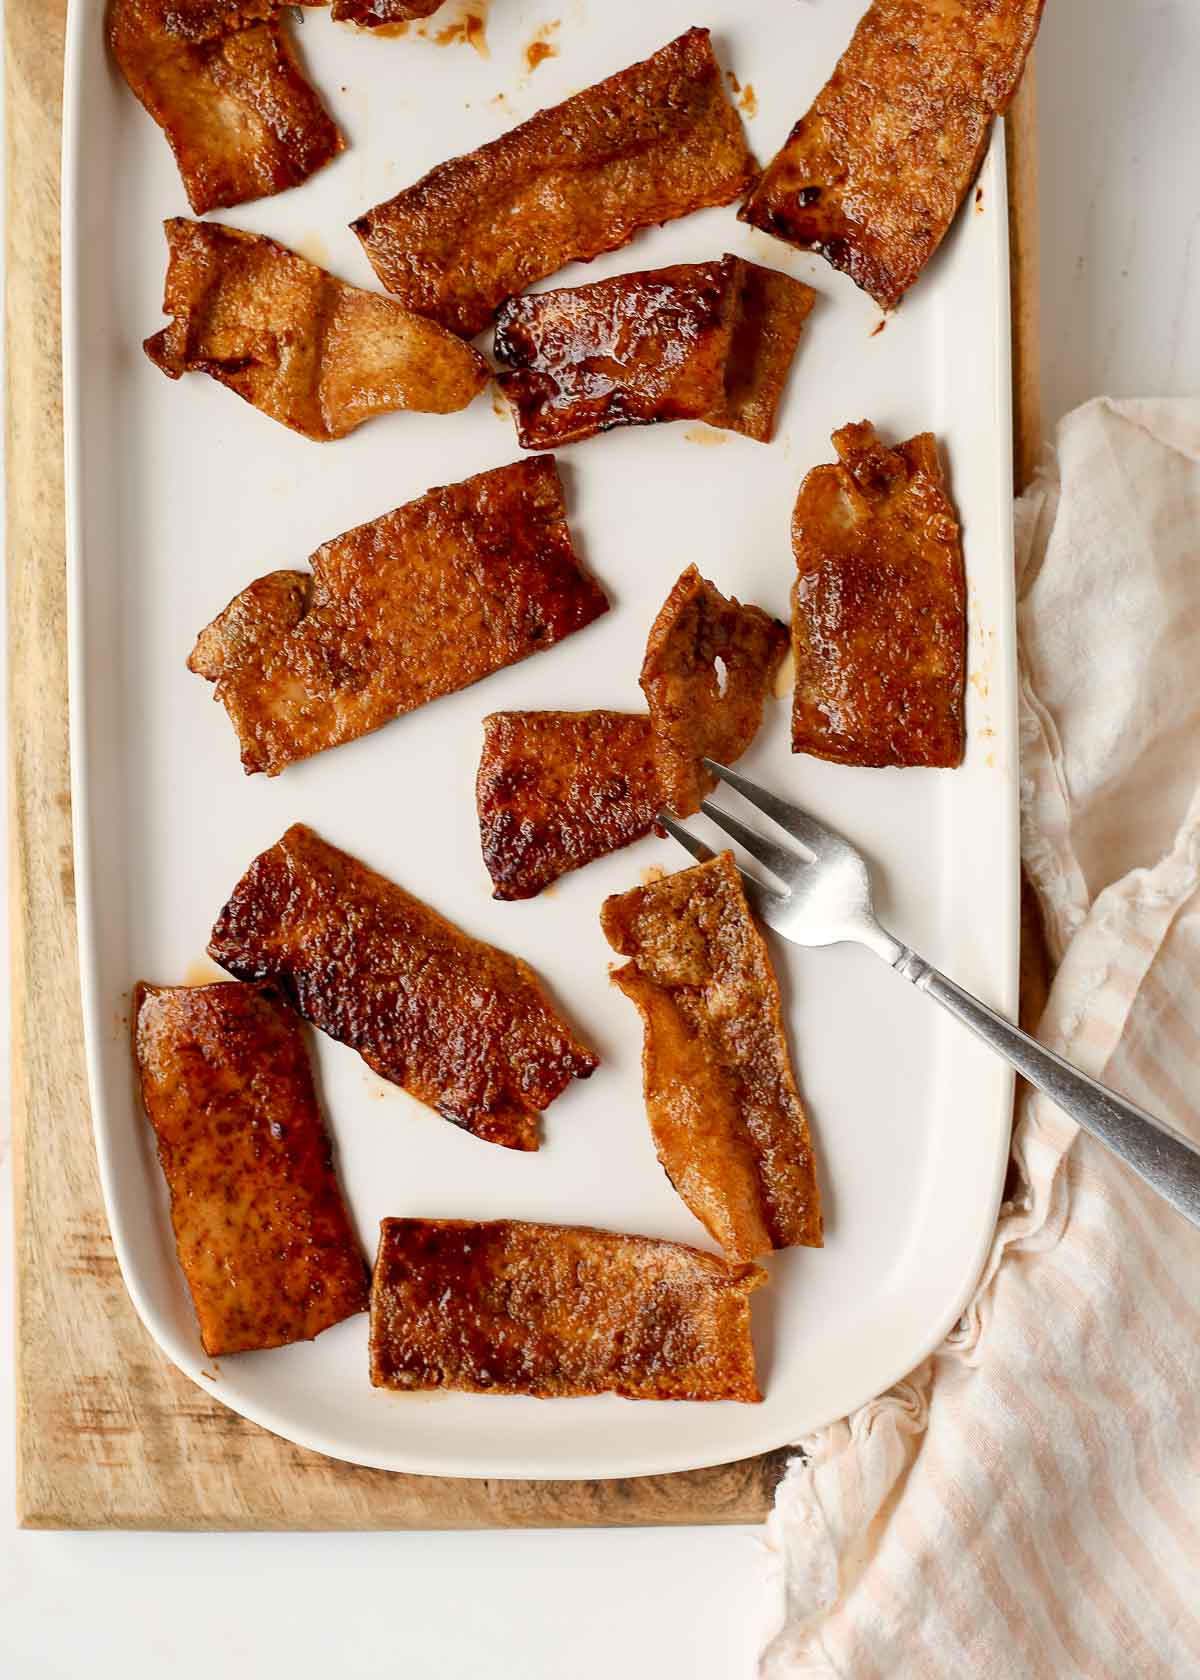 Tofu bacon on a platter ready to eat